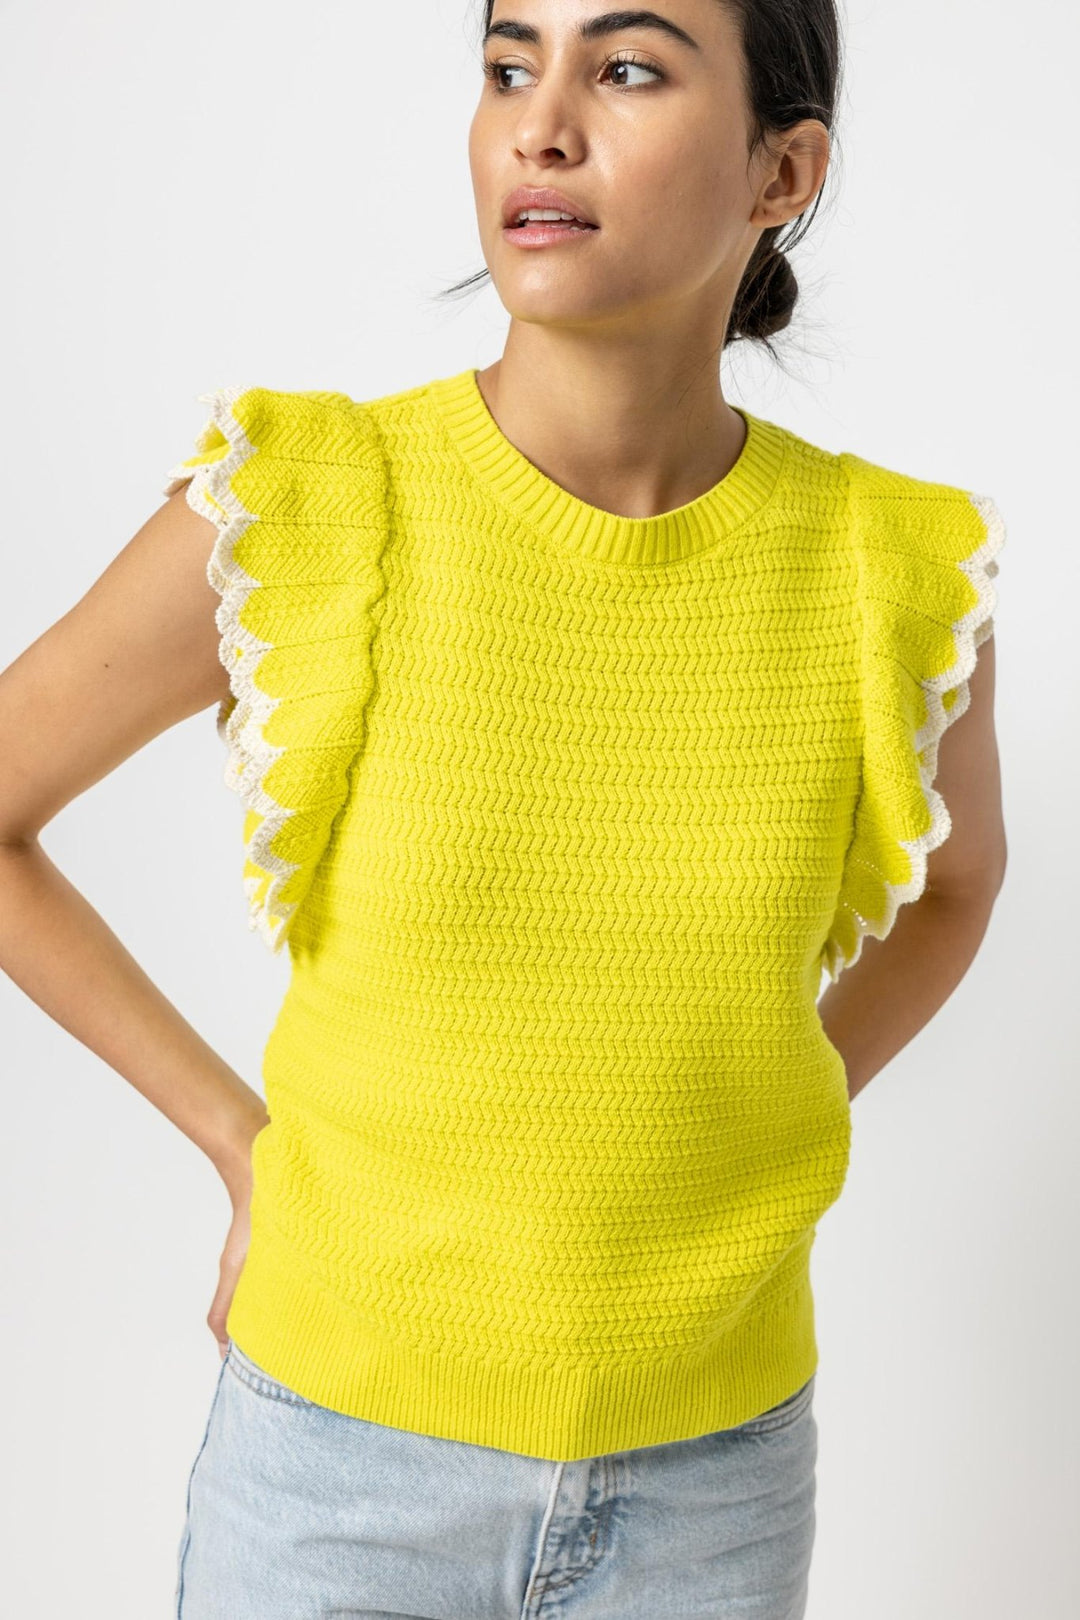 Lilla P - Tipped Sleeve Crewneck Sweater: Lemon Lime - Shorely Chic Boutique